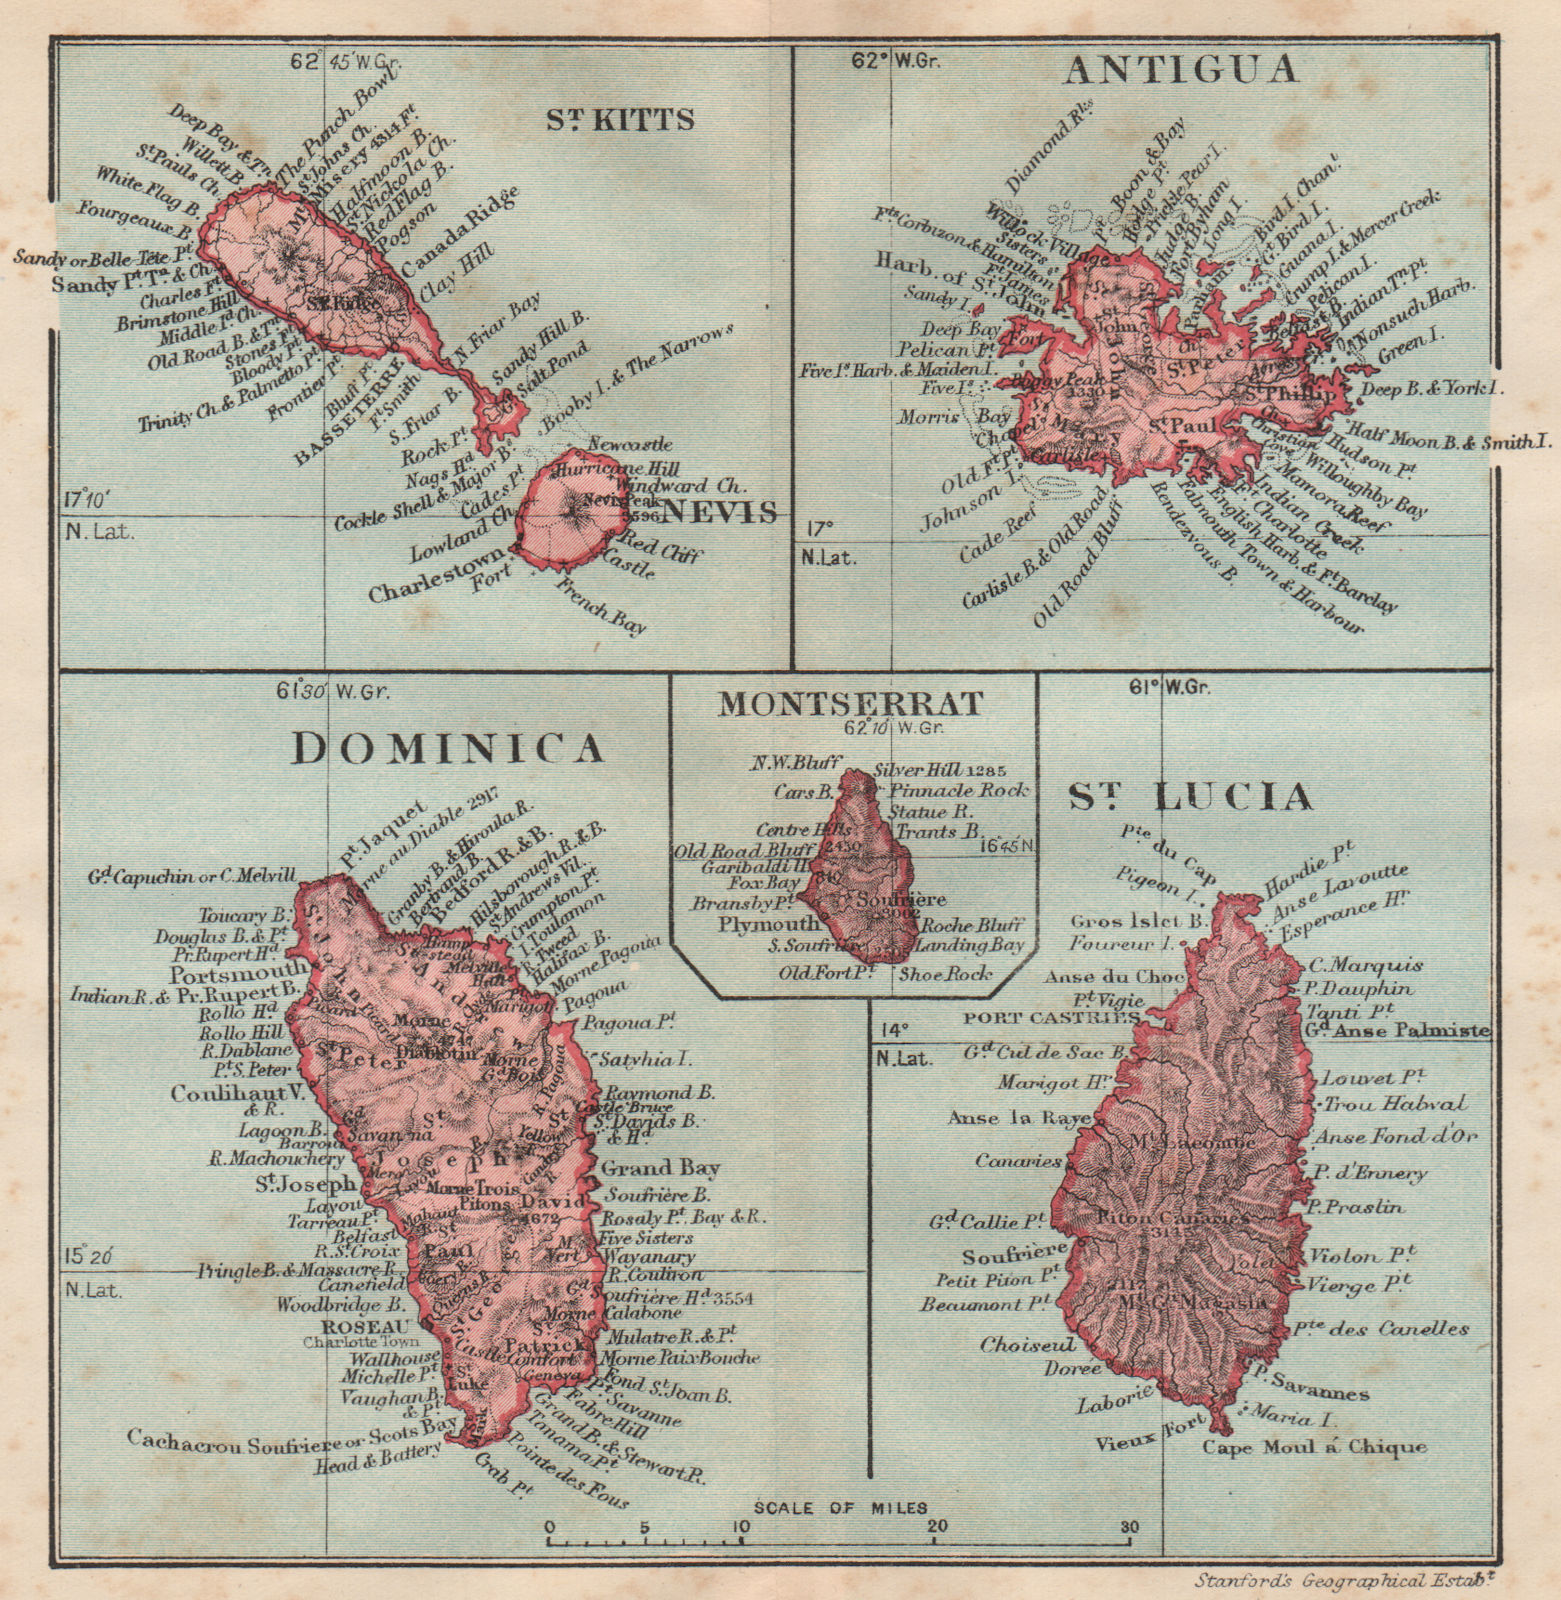 Associate Product WEST INDIES. Dominica St Kitts Antigua St Lucia Montserrat 1914 old map